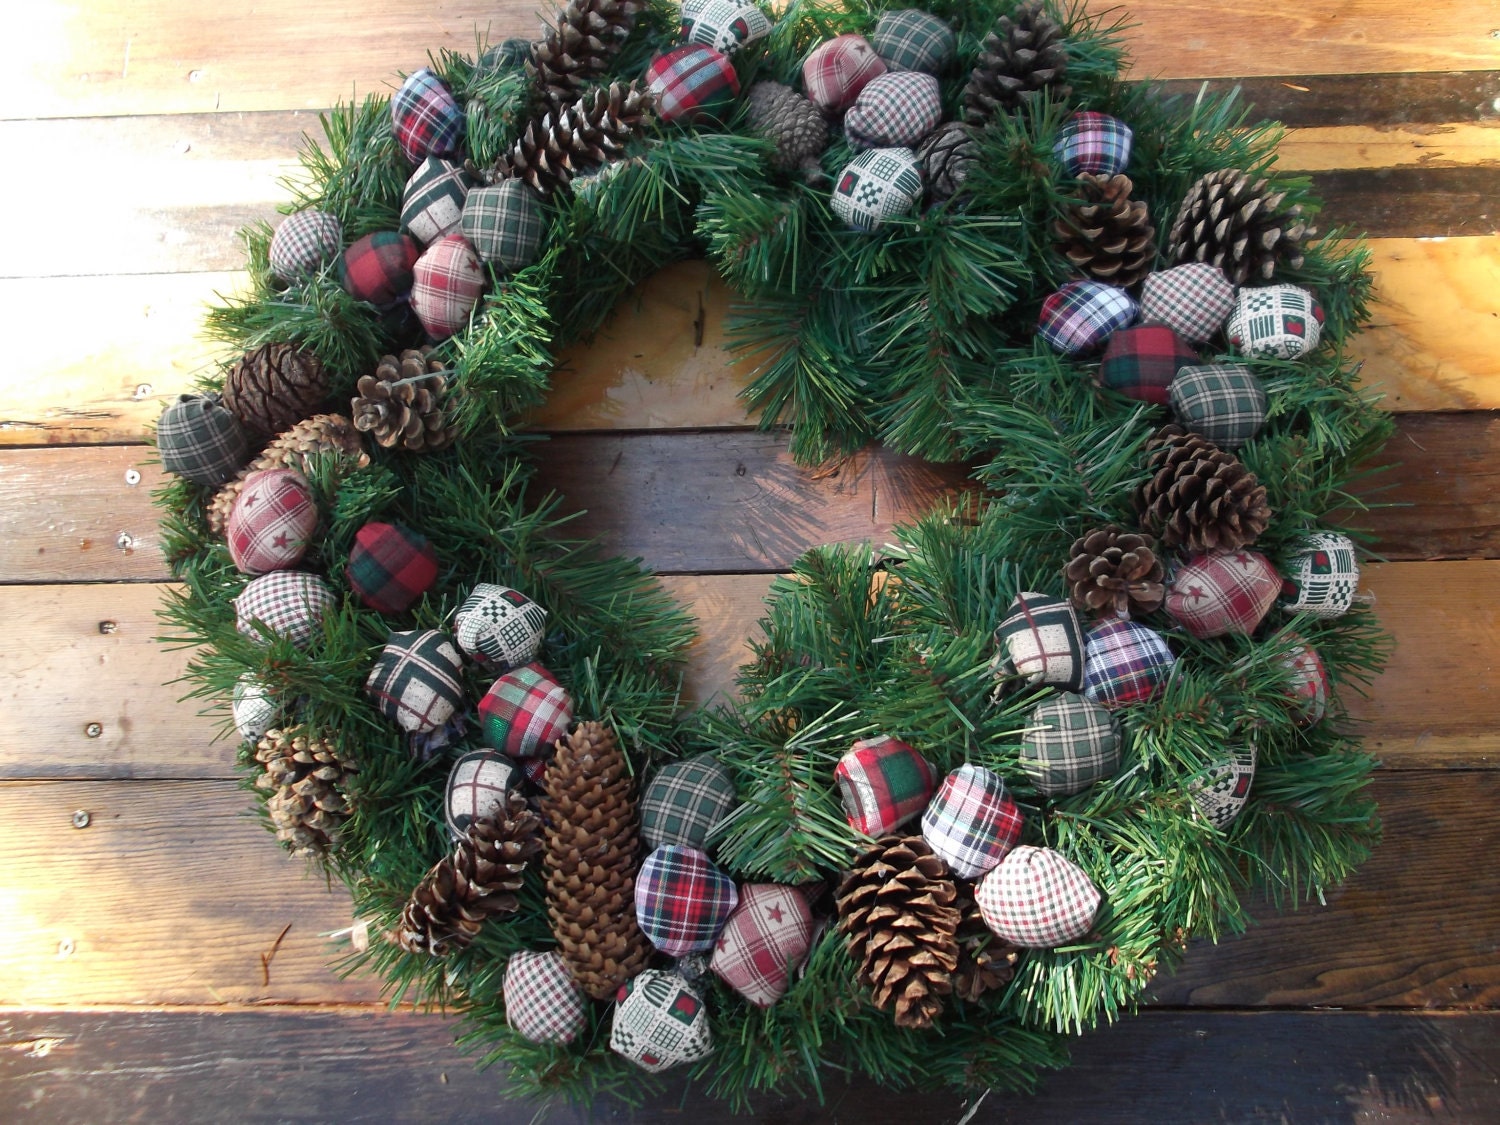 Evergreen Winter Wreath with Pinecones and Fabric Puffs